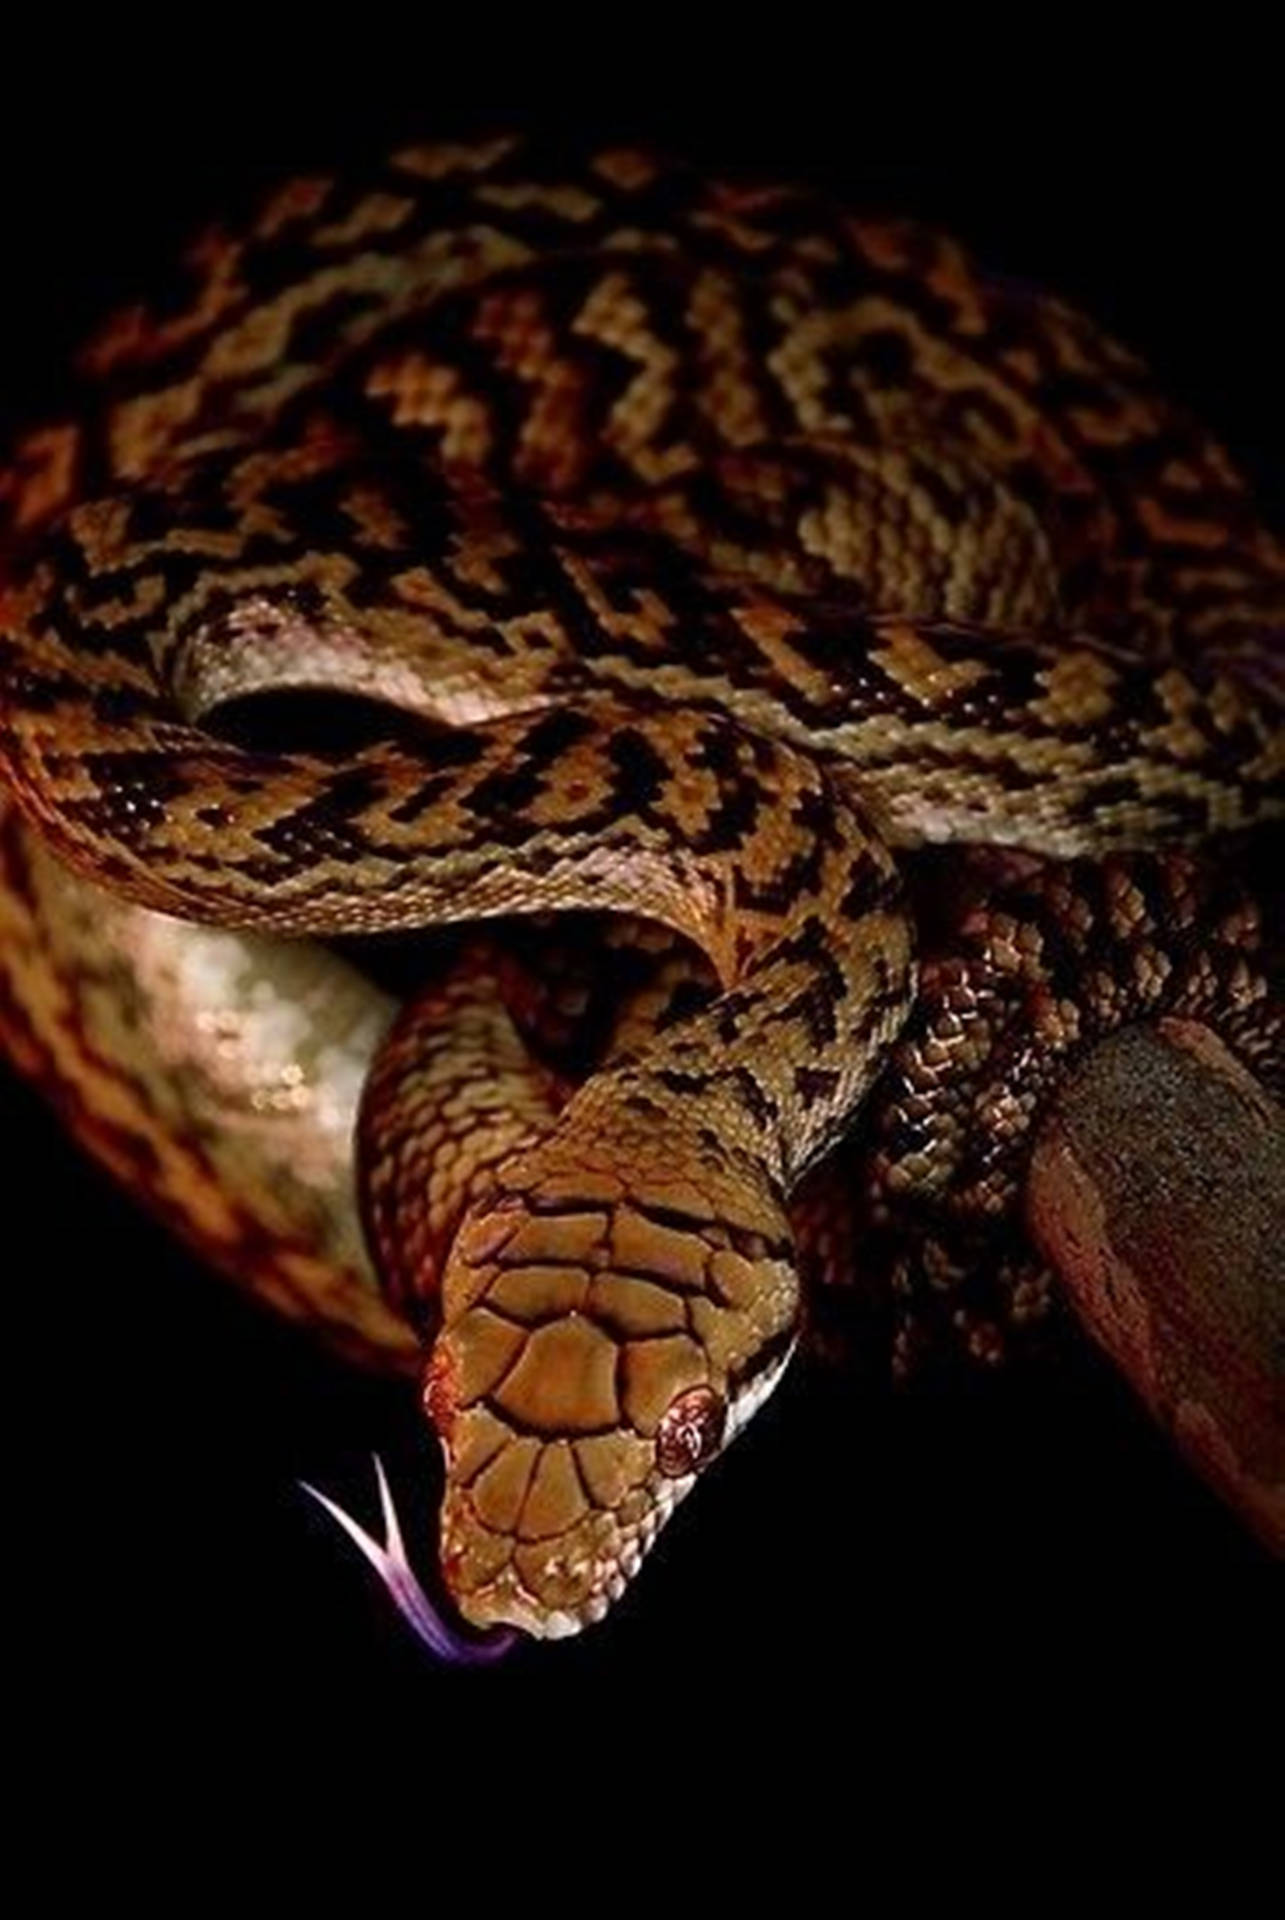 Caption: Stunning Water Moccasin Exhibiting a Purple Tongue Wallpaper